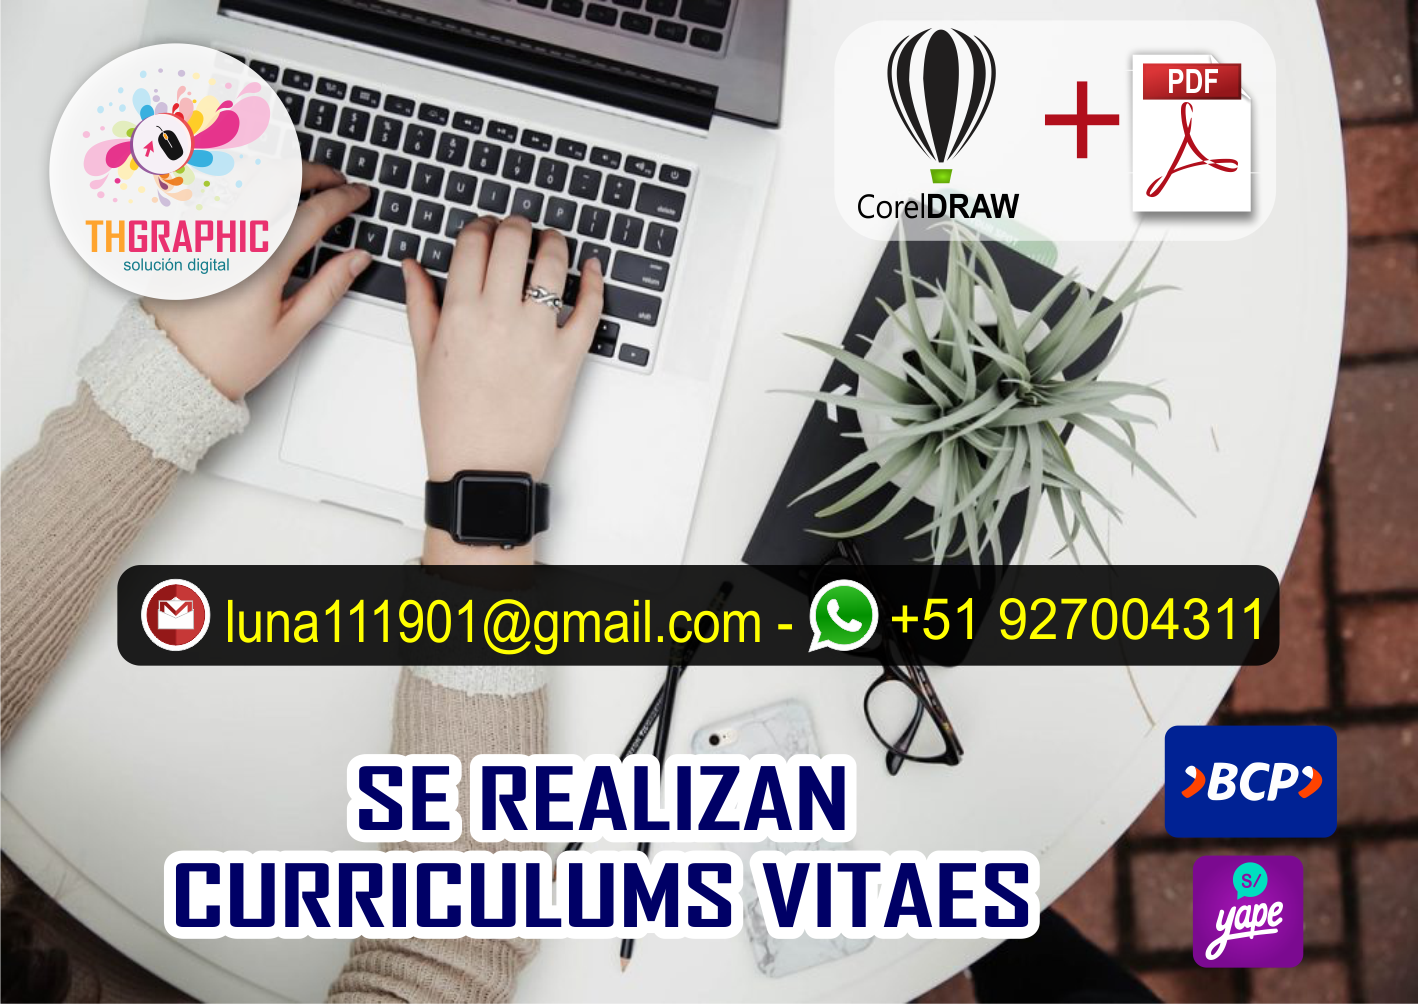 LP Vas . : ® + 5 Ae
GRAPHIC om “ wy,
A JURE

, if

      
   
  

ry
2)

SE Rextizan
&amp;\ CURRICULUMS VITAES